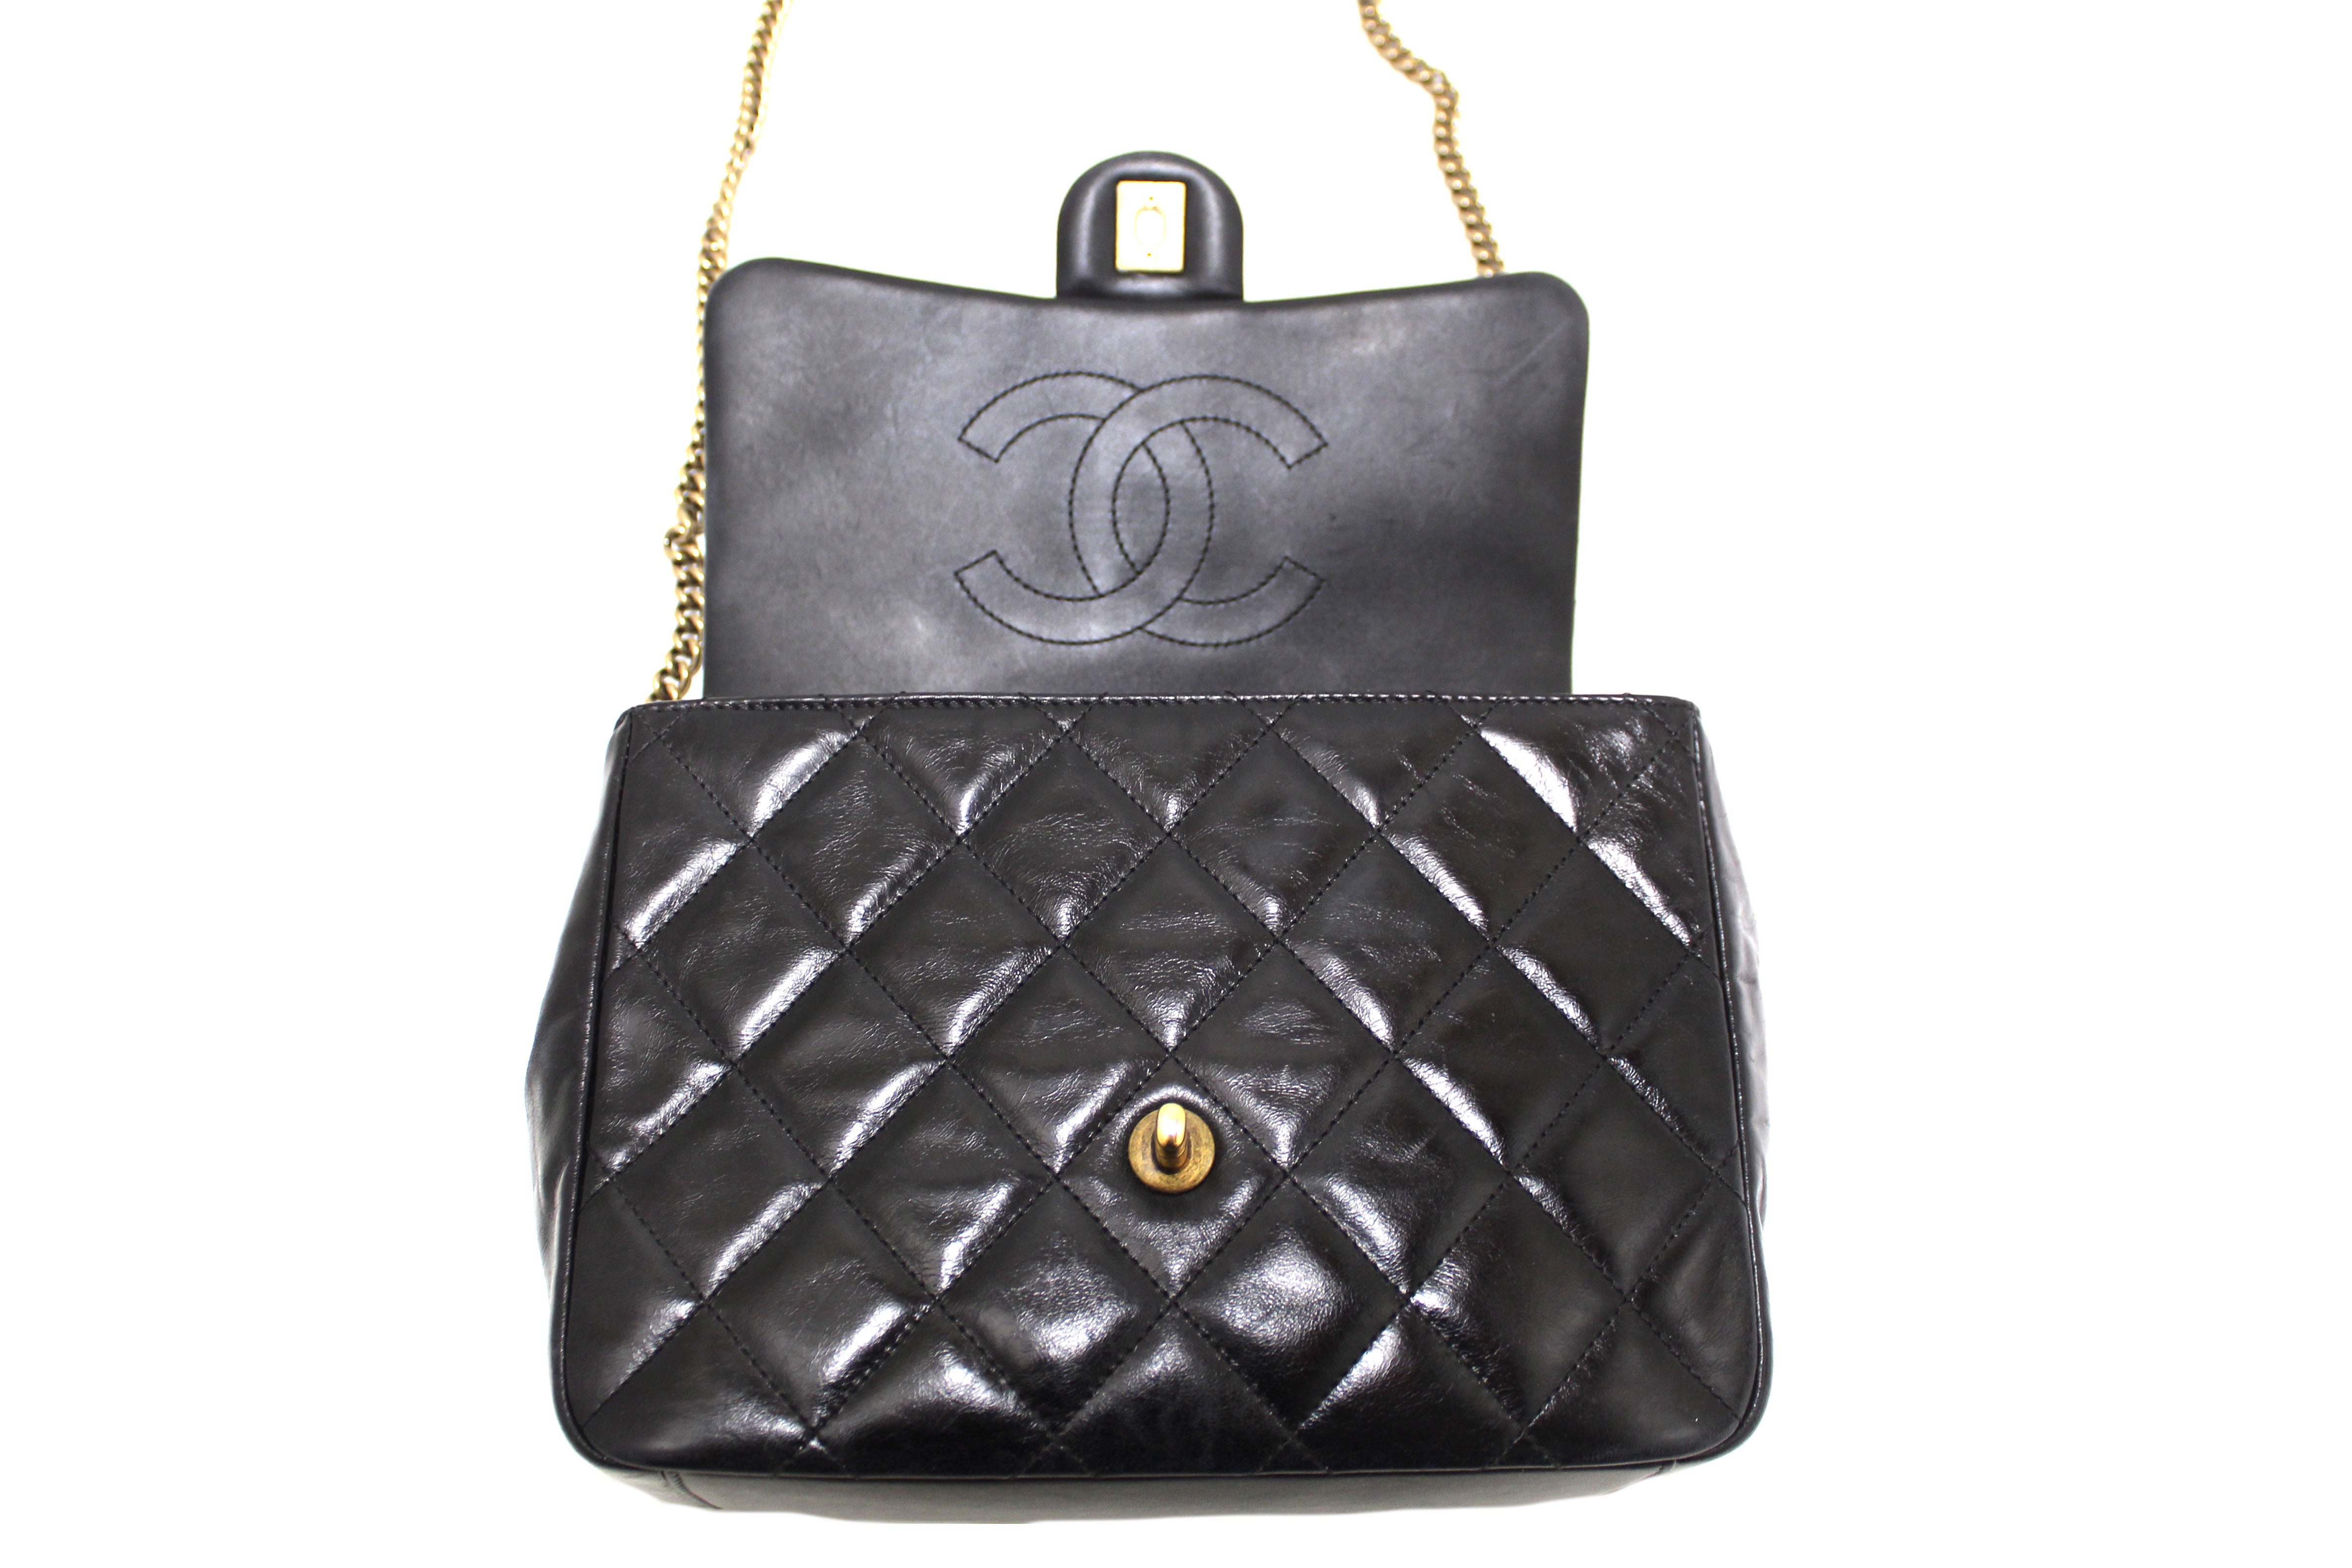 Authentic Chanel Black Aged Quilted Calfskin Leather Gold Bar Top Handle Medium Flap Bag